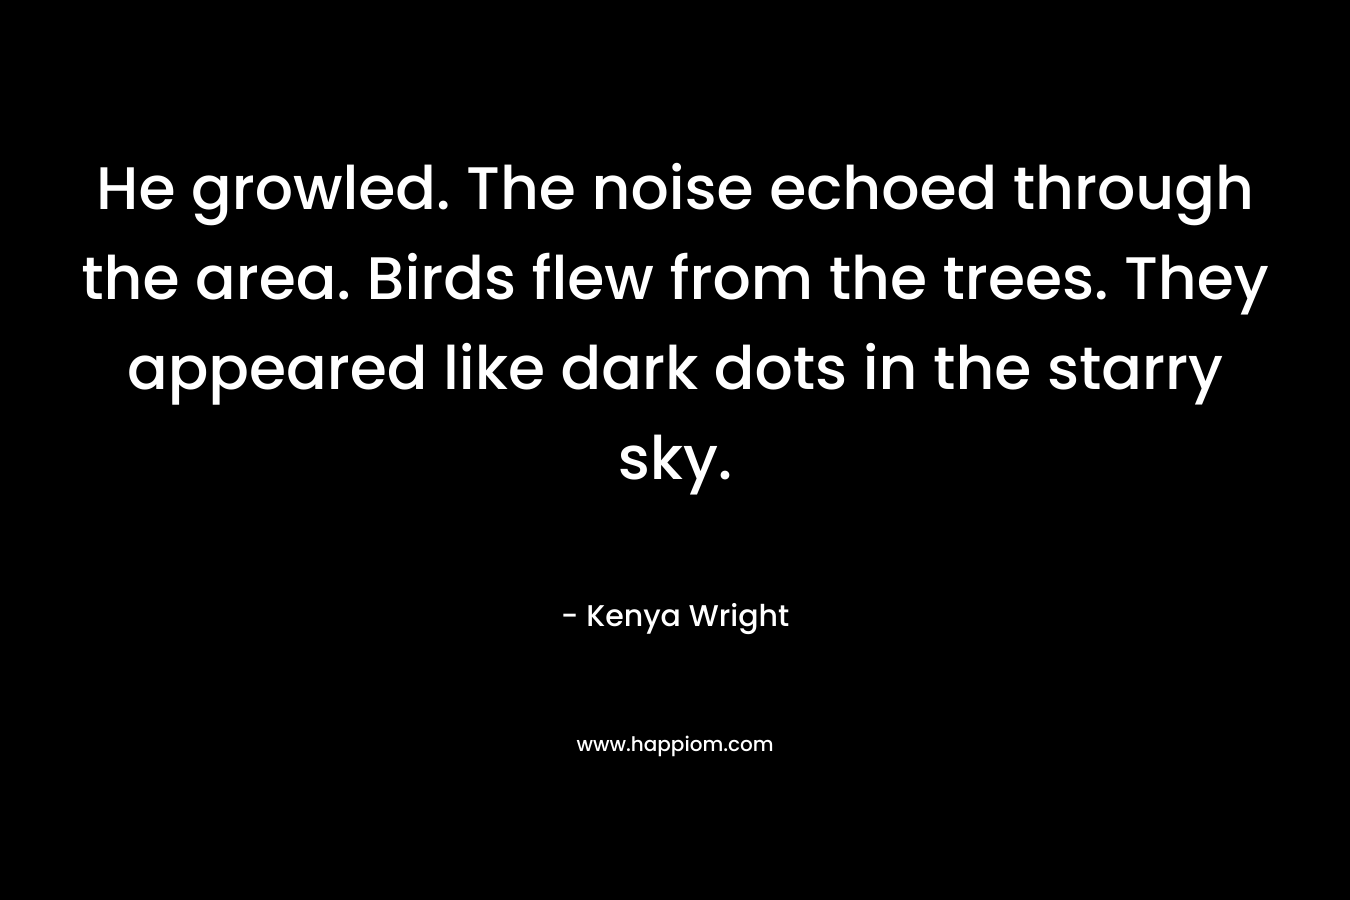 He growled. The noise echoed through the area. Birds flew from the trees. They appeared like dark dots in the starry sky. – Kenya Wright